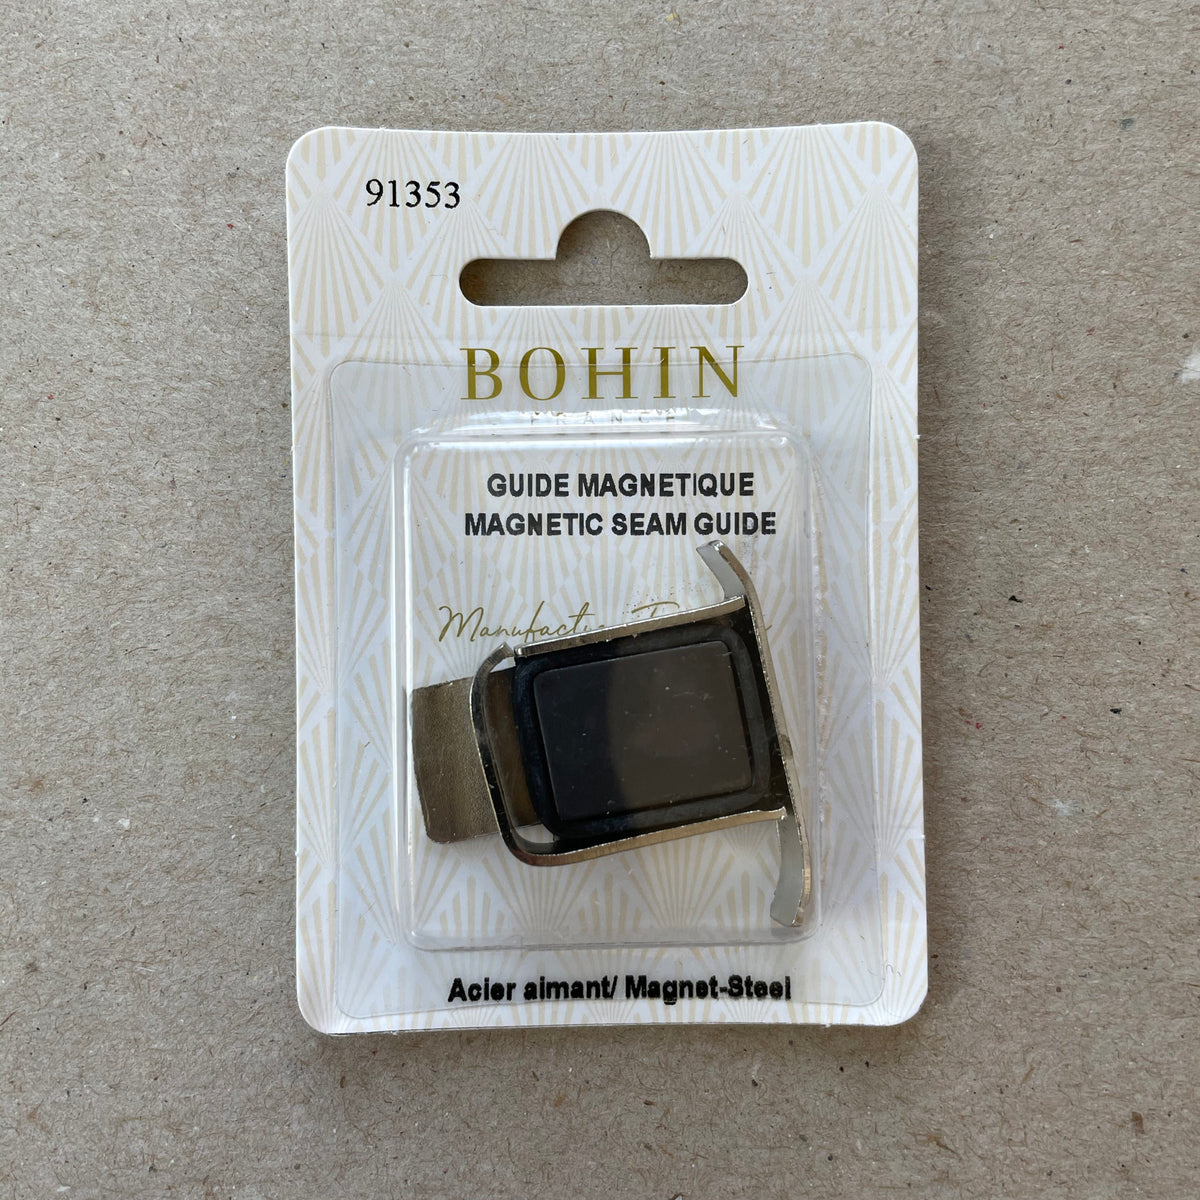 Bohin Magnetic Sew-On Button 3/4 2/Pkg-Nickel-Plated